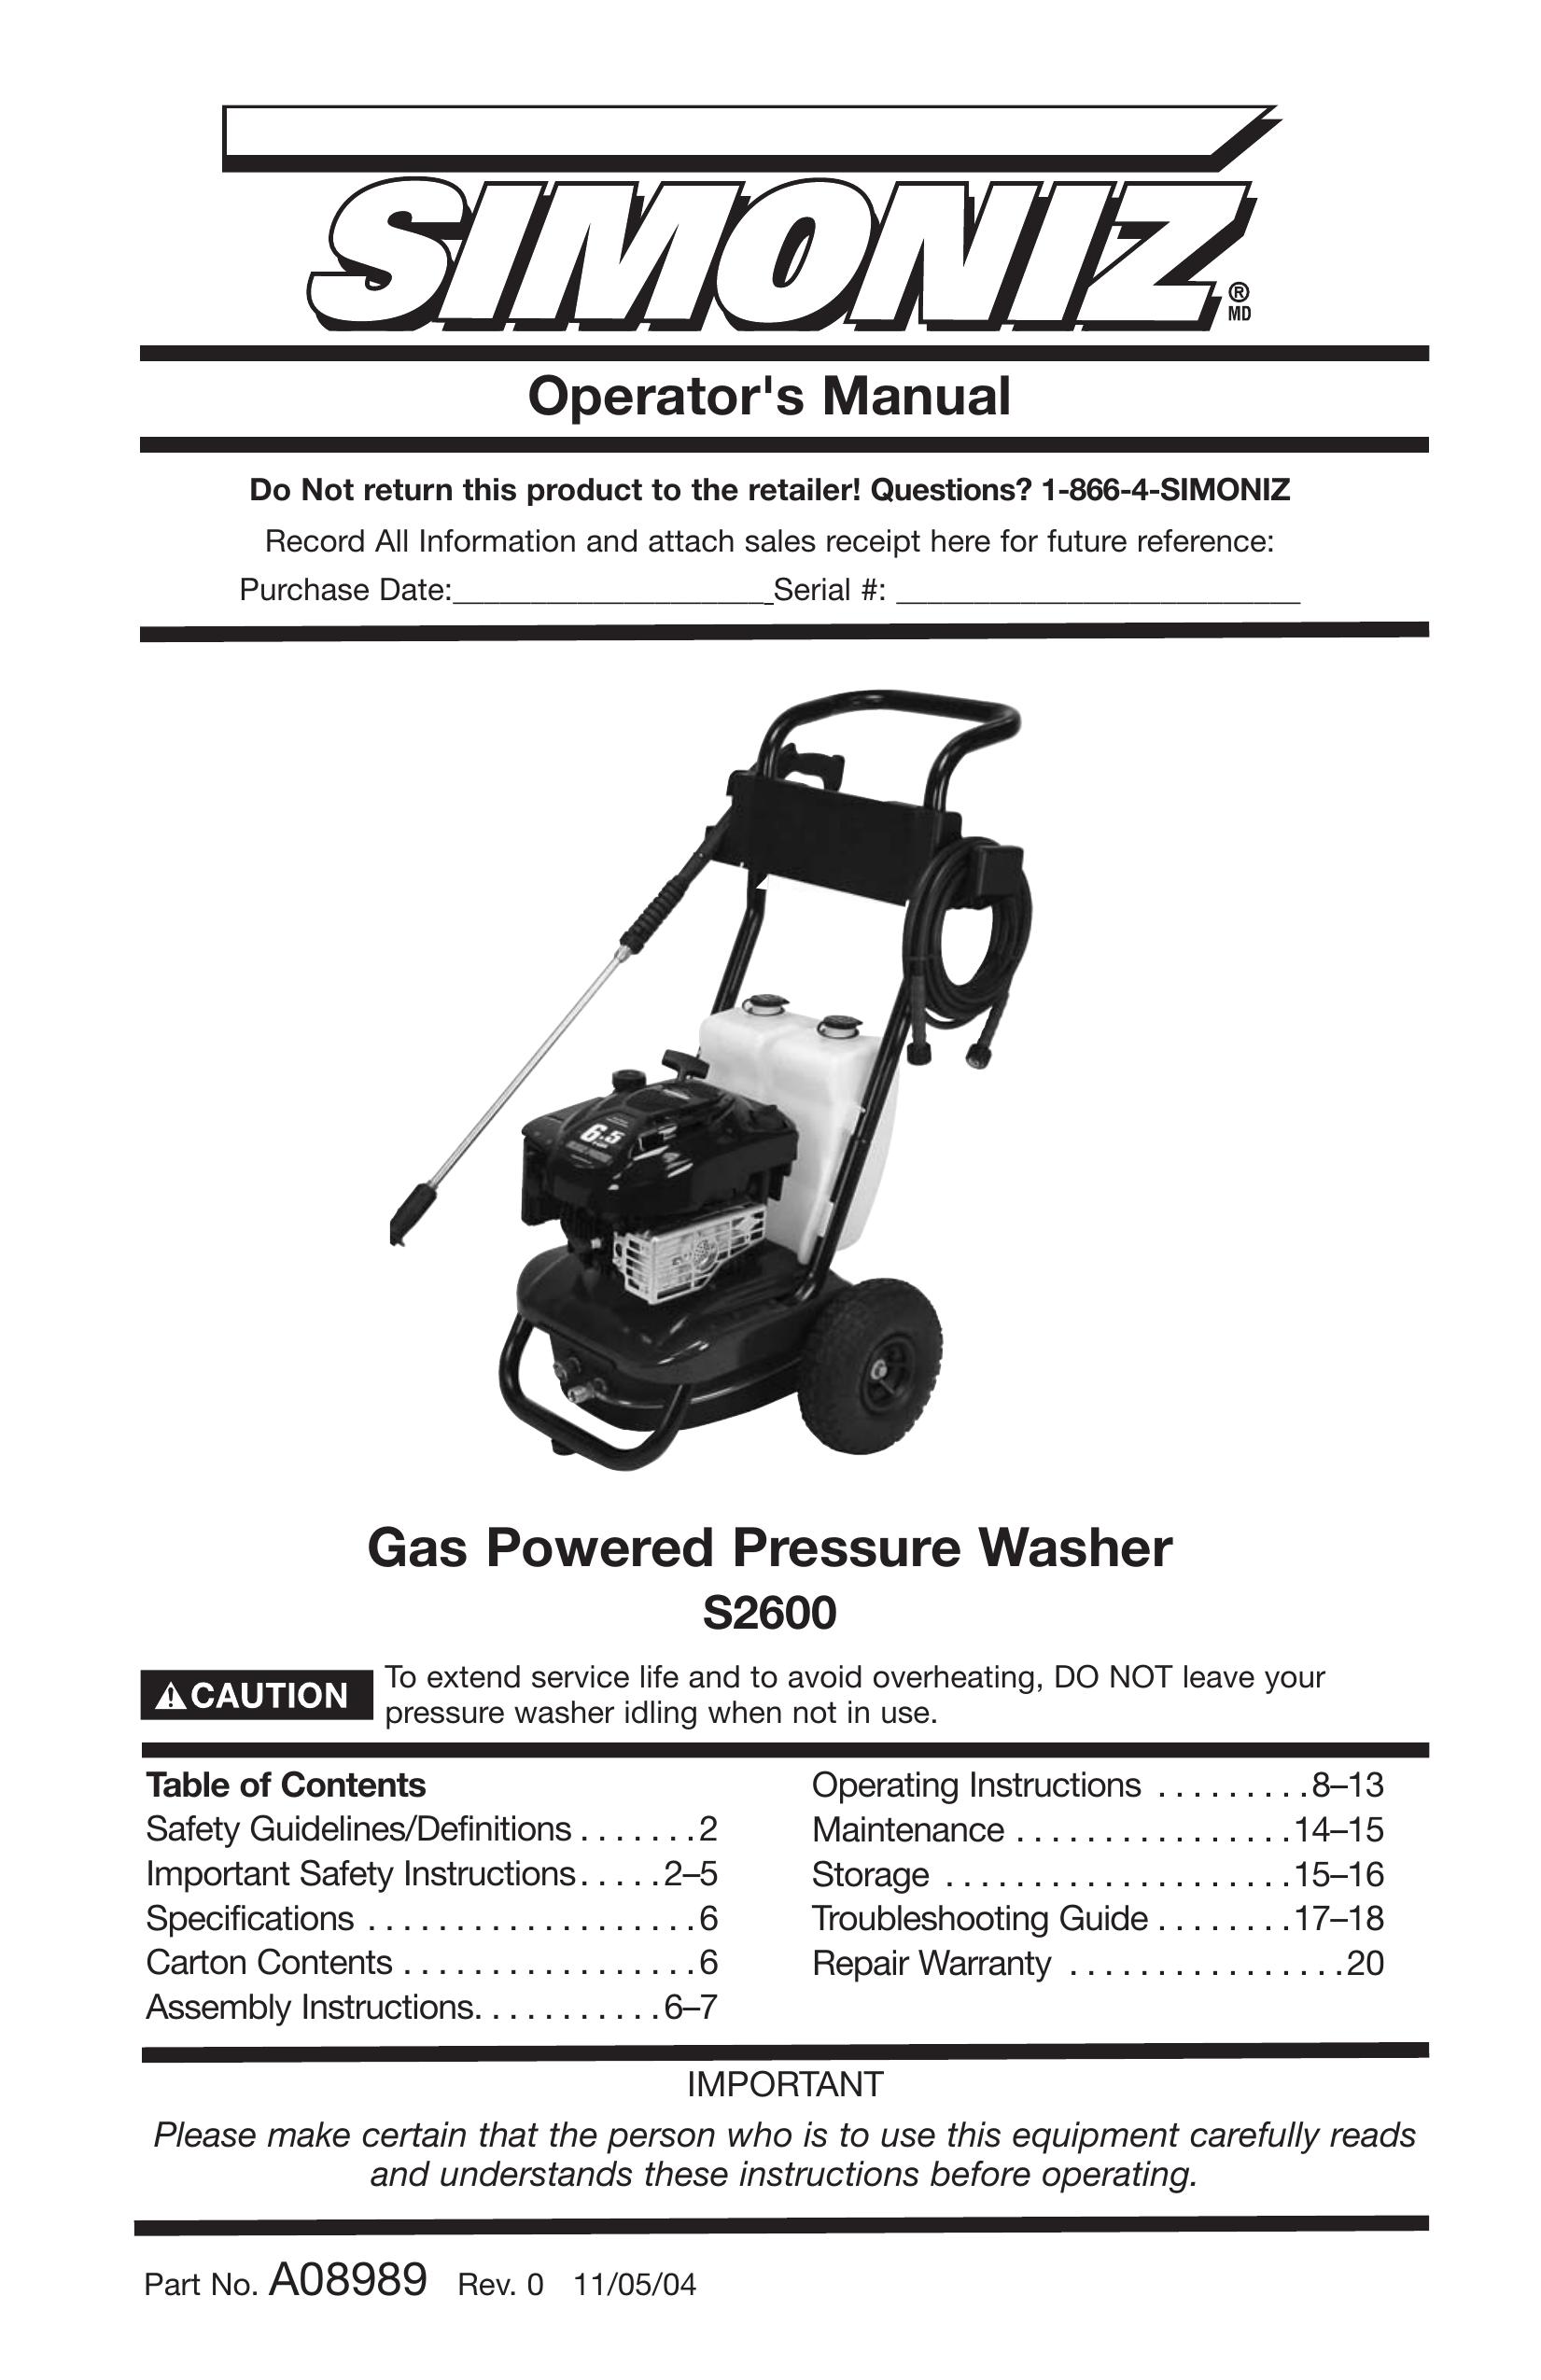 DeVillbiss Air Power Company S2600 Pressure Washer User Manual